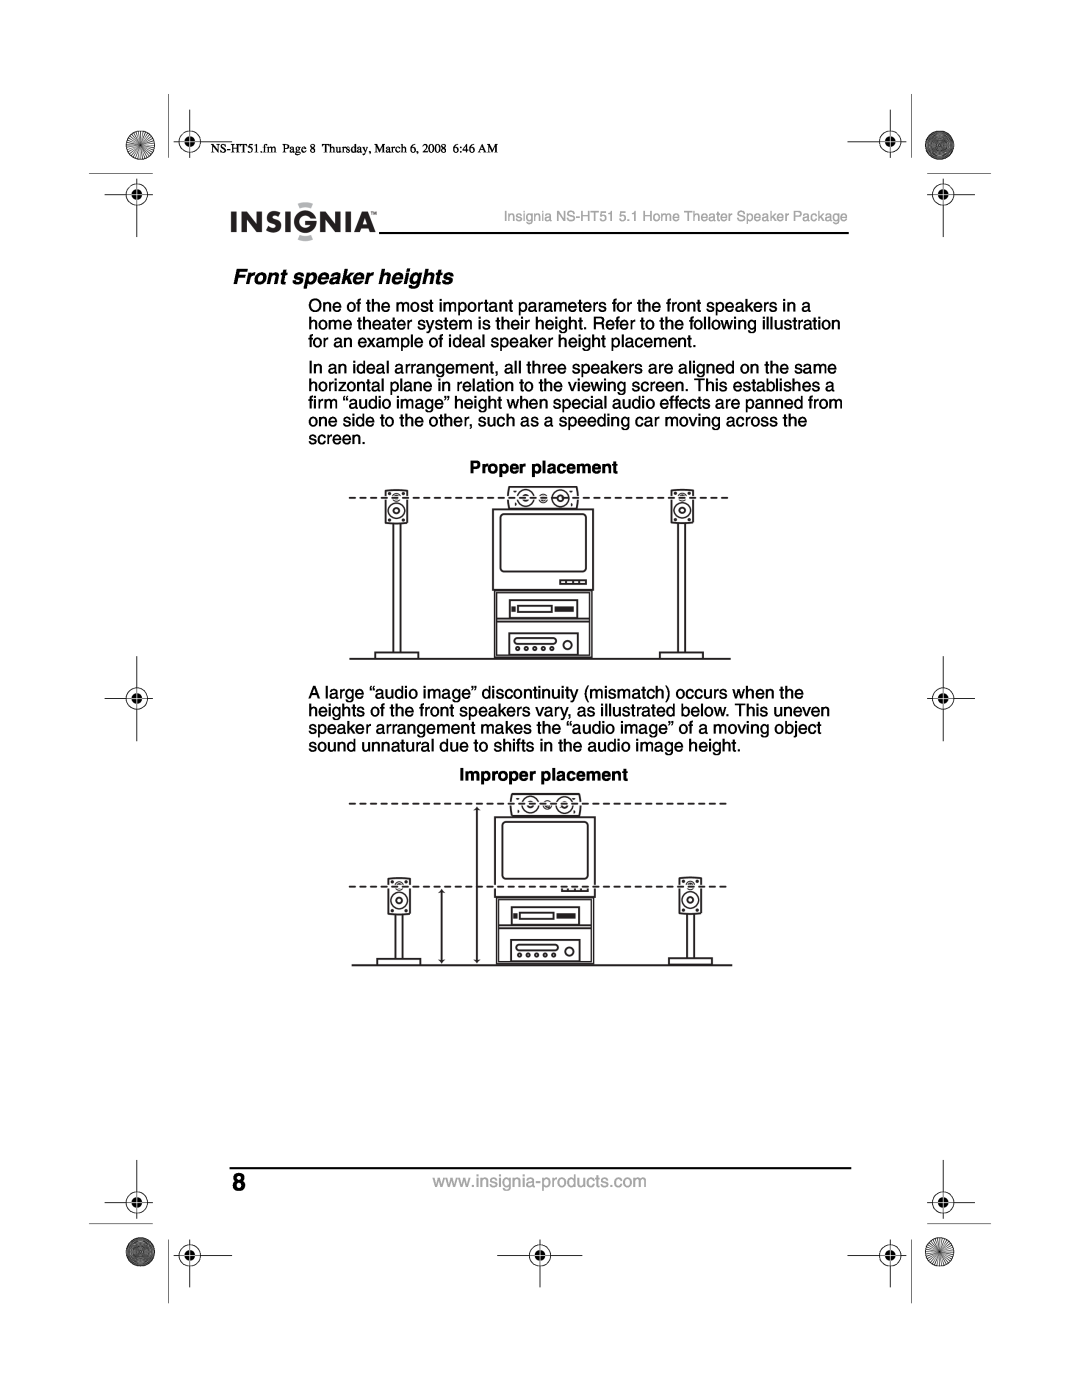 Insignia NS-HT51 manual Front speaker heights, Proper placement, Improper placement 